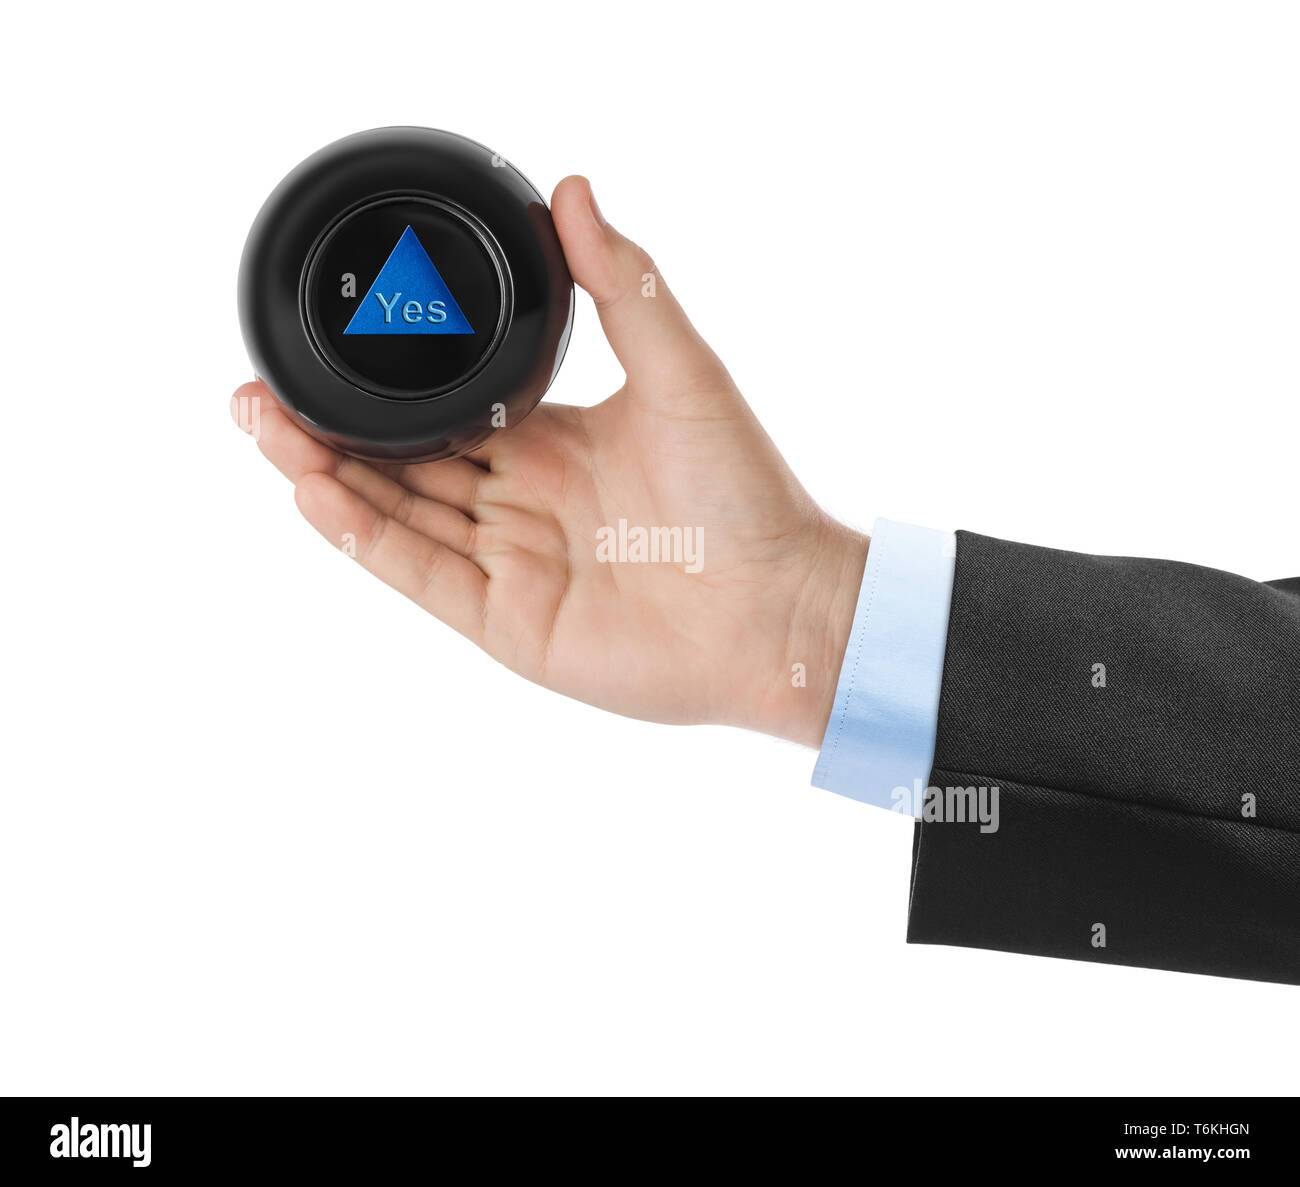 Magic ball with prediction Yes in hand Stock Photo